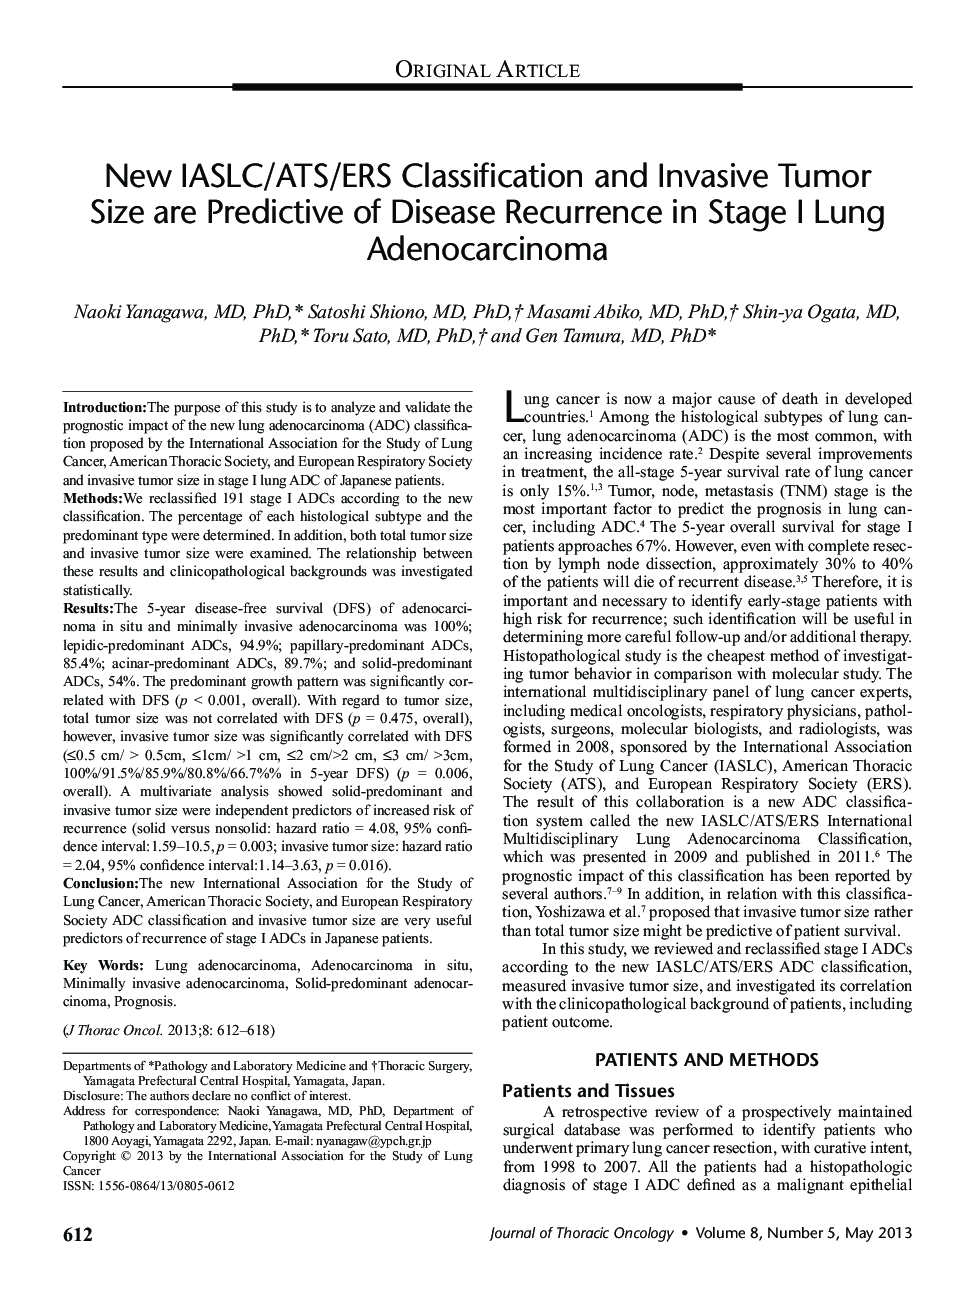 New IASLC/ATS/ERS Classification and Invasive Tumor Size are Predictive of Disease Recurrence in Stage I Lung Adenocarcinoma 